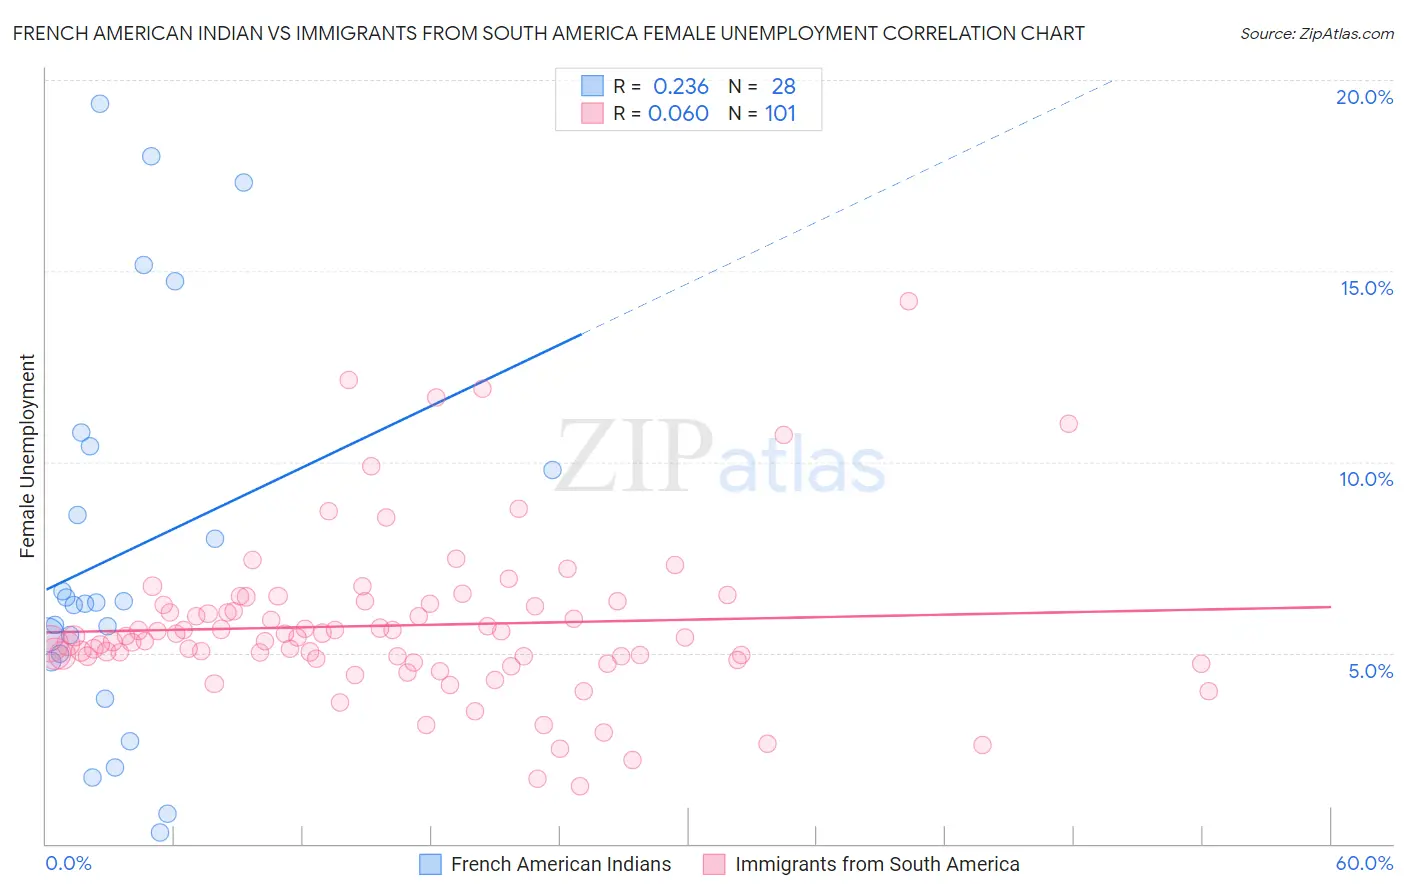 French American Indian vs Immigrants from South America Female Unemployment